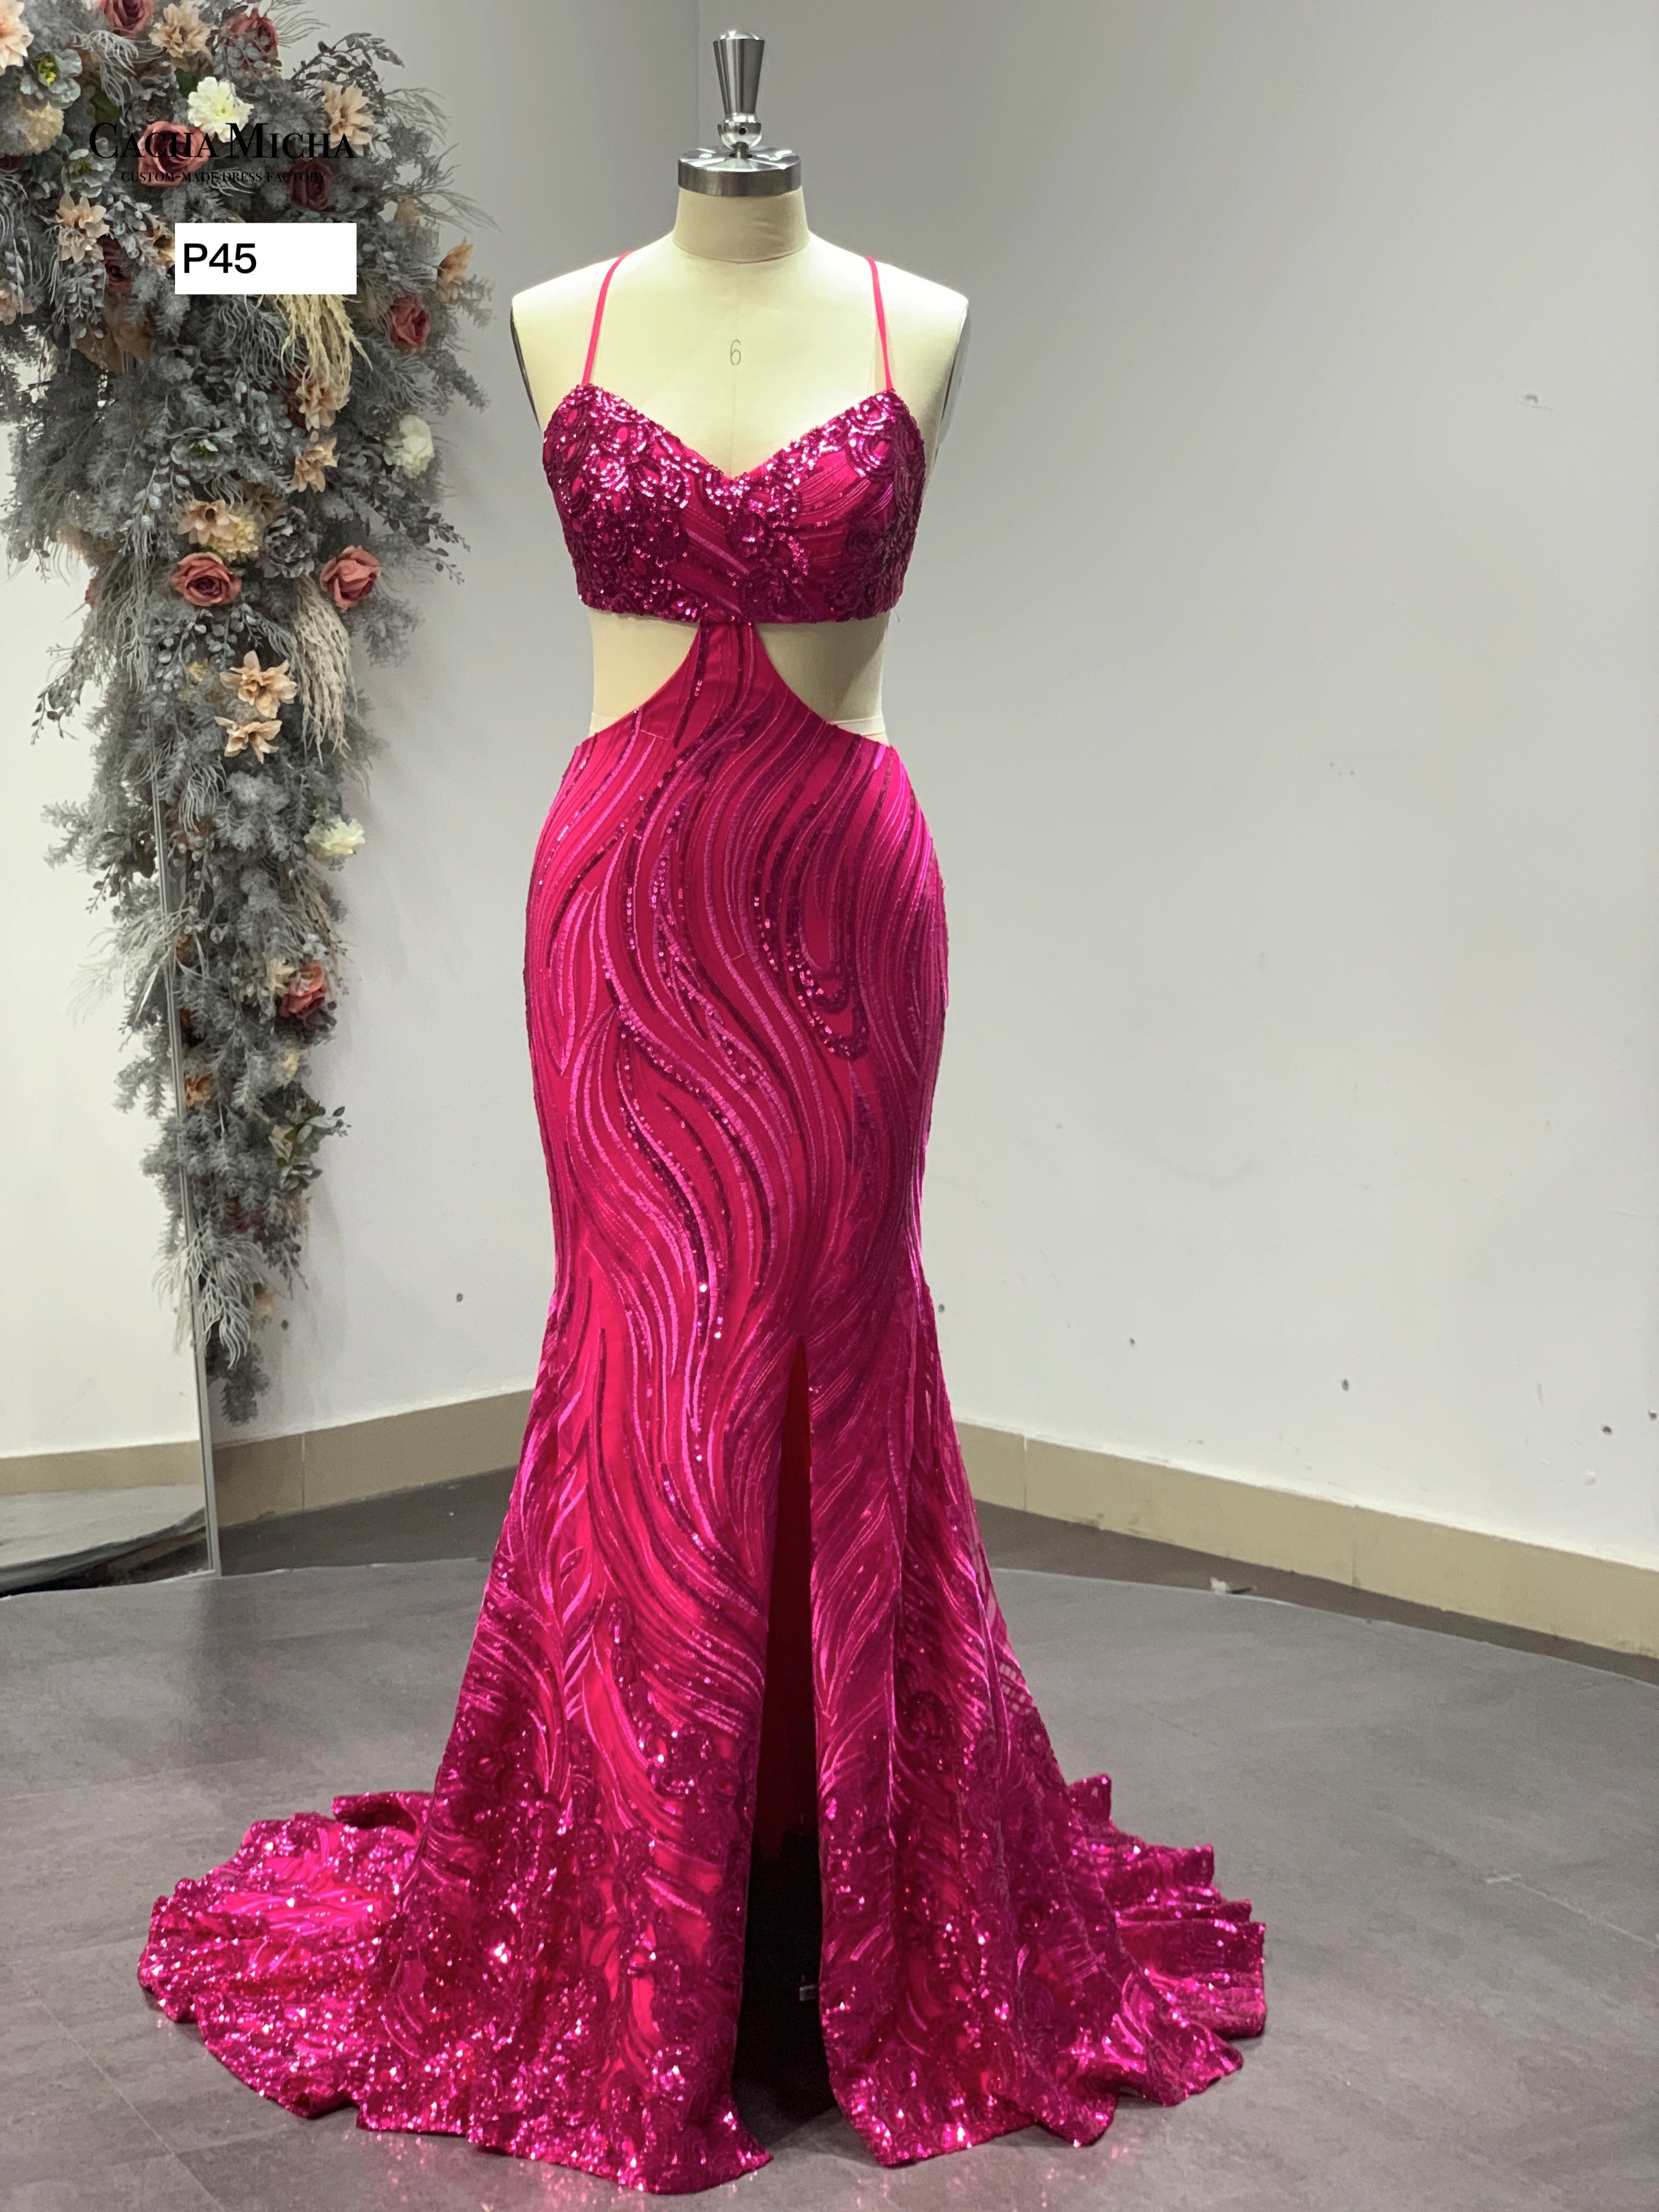 Fuchsia Sequin Backless Sexy Prom Dress P45